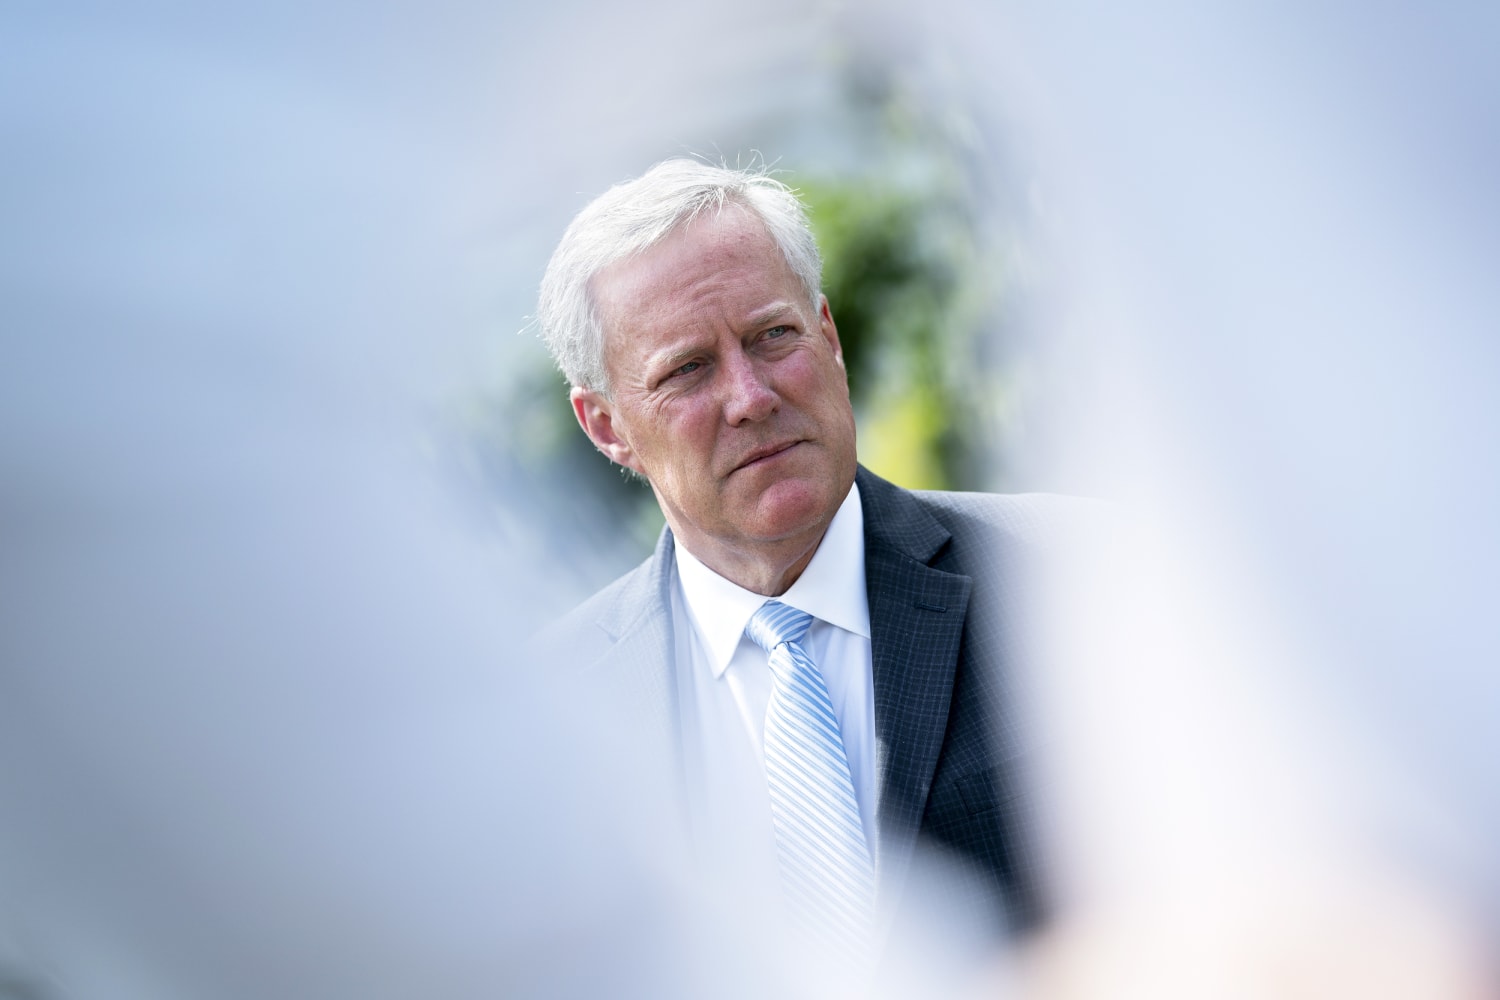 Jan. 6 committee recommends Mark Meadows face contempt charge